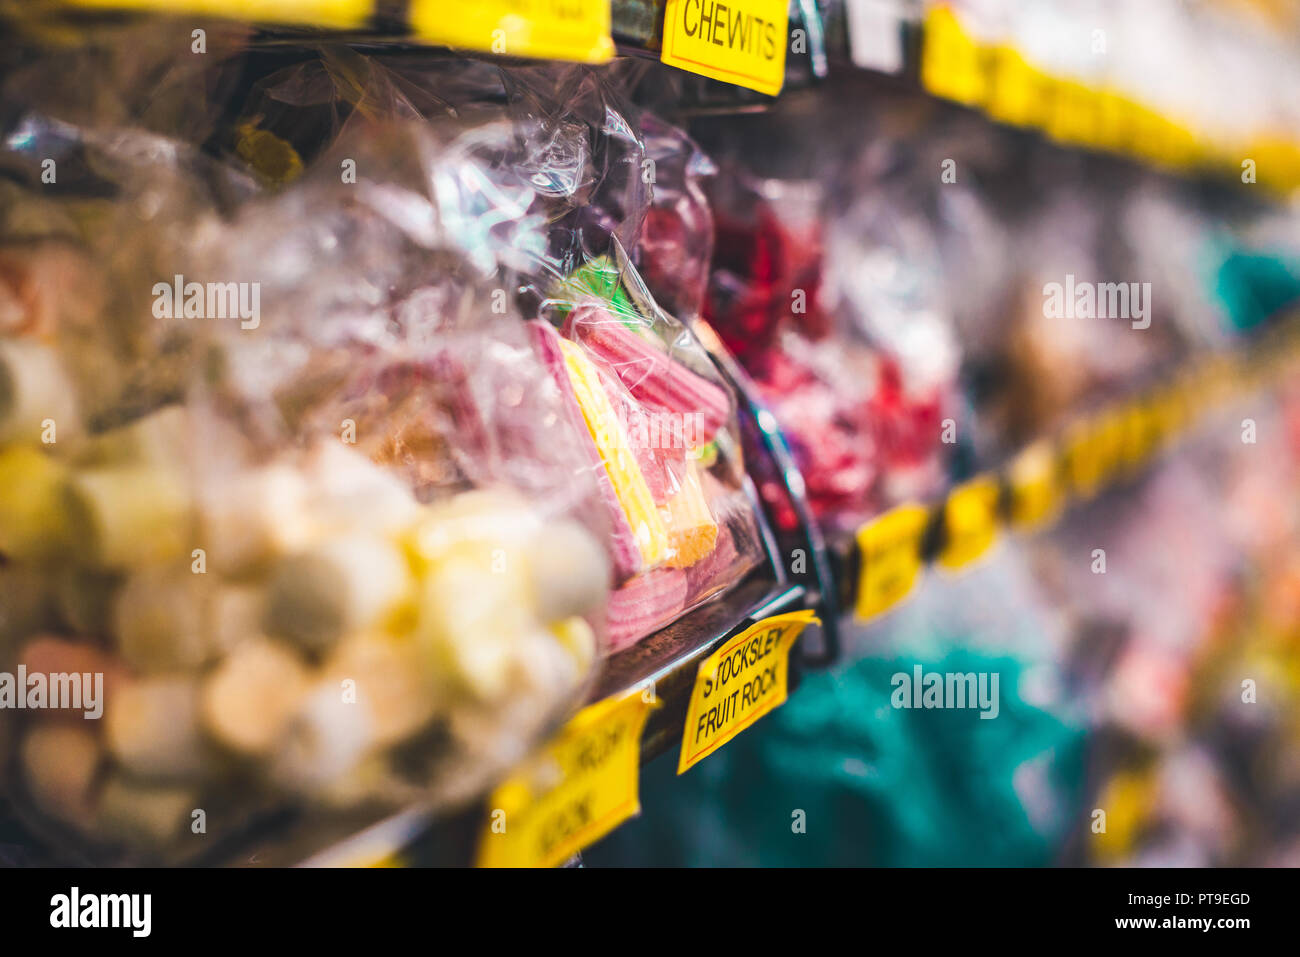 Tasty looking red and yellow Sweets and Candy in a wrapper on a shelf of a sweet shop in Matlock, UK Stock Photo